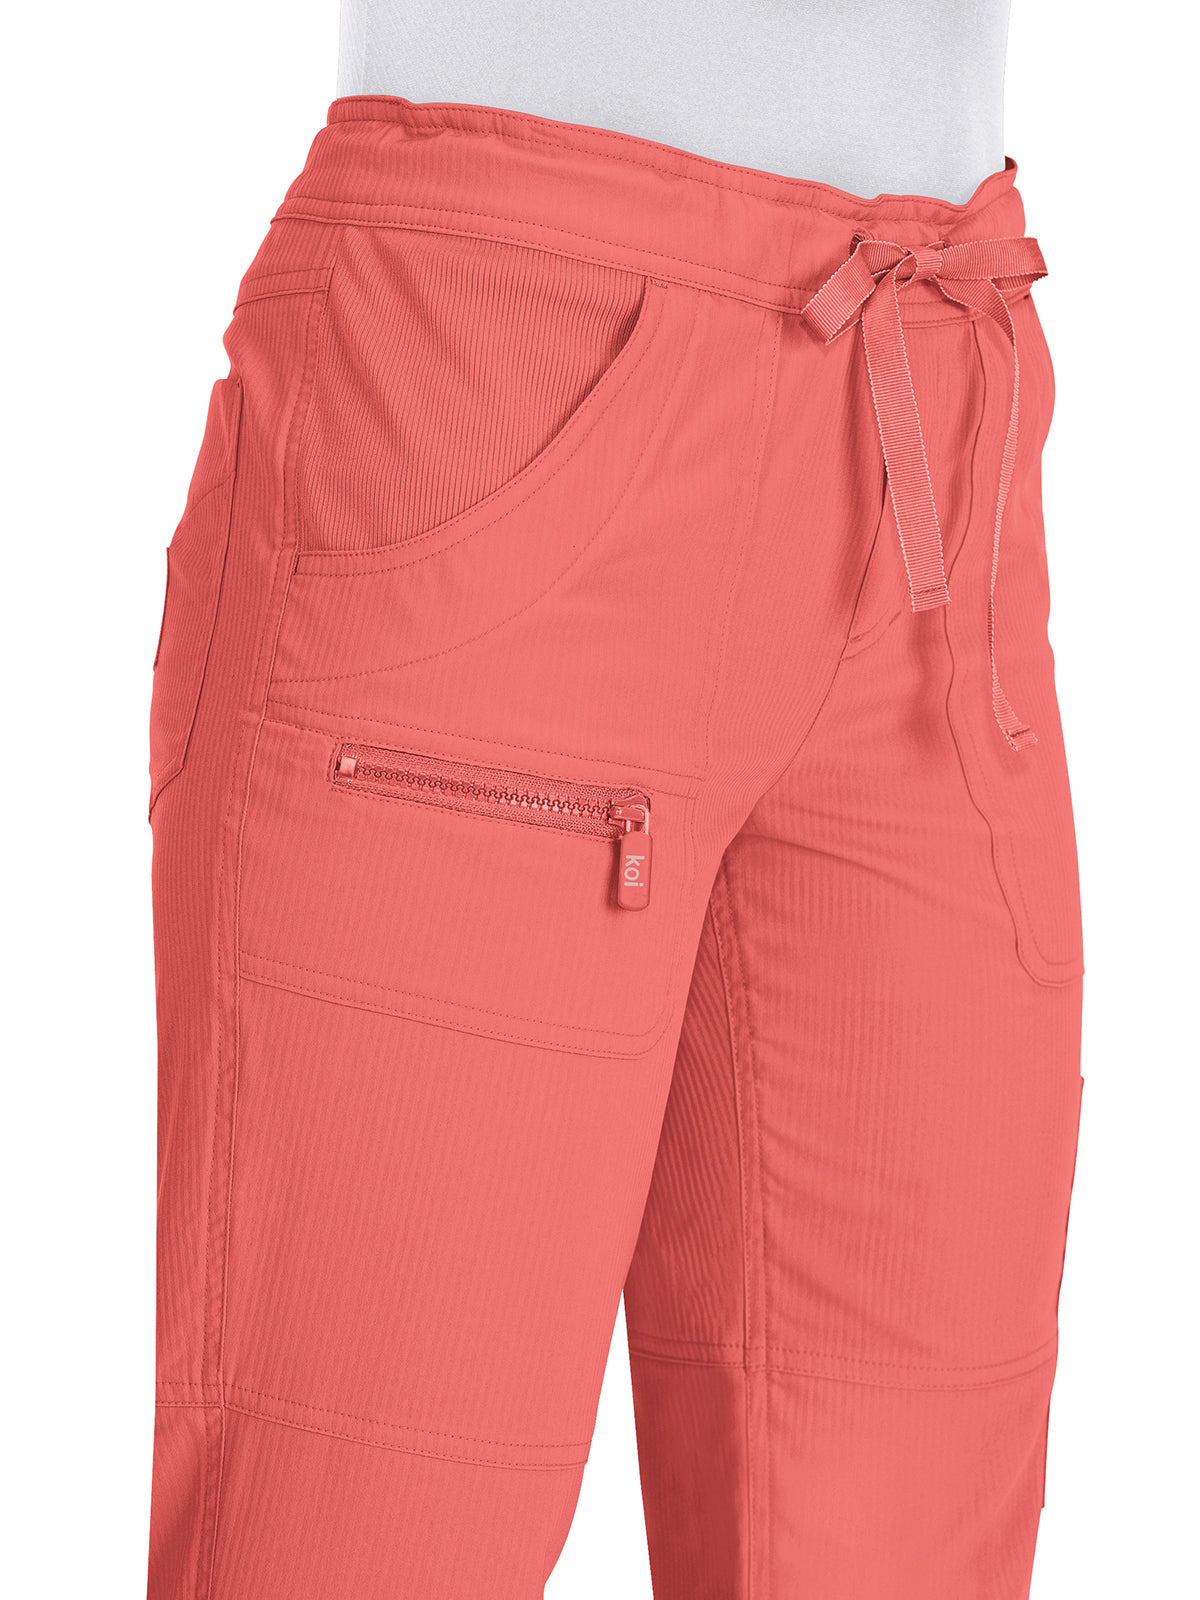 Women's Lightweight Pant - 721 - Coral